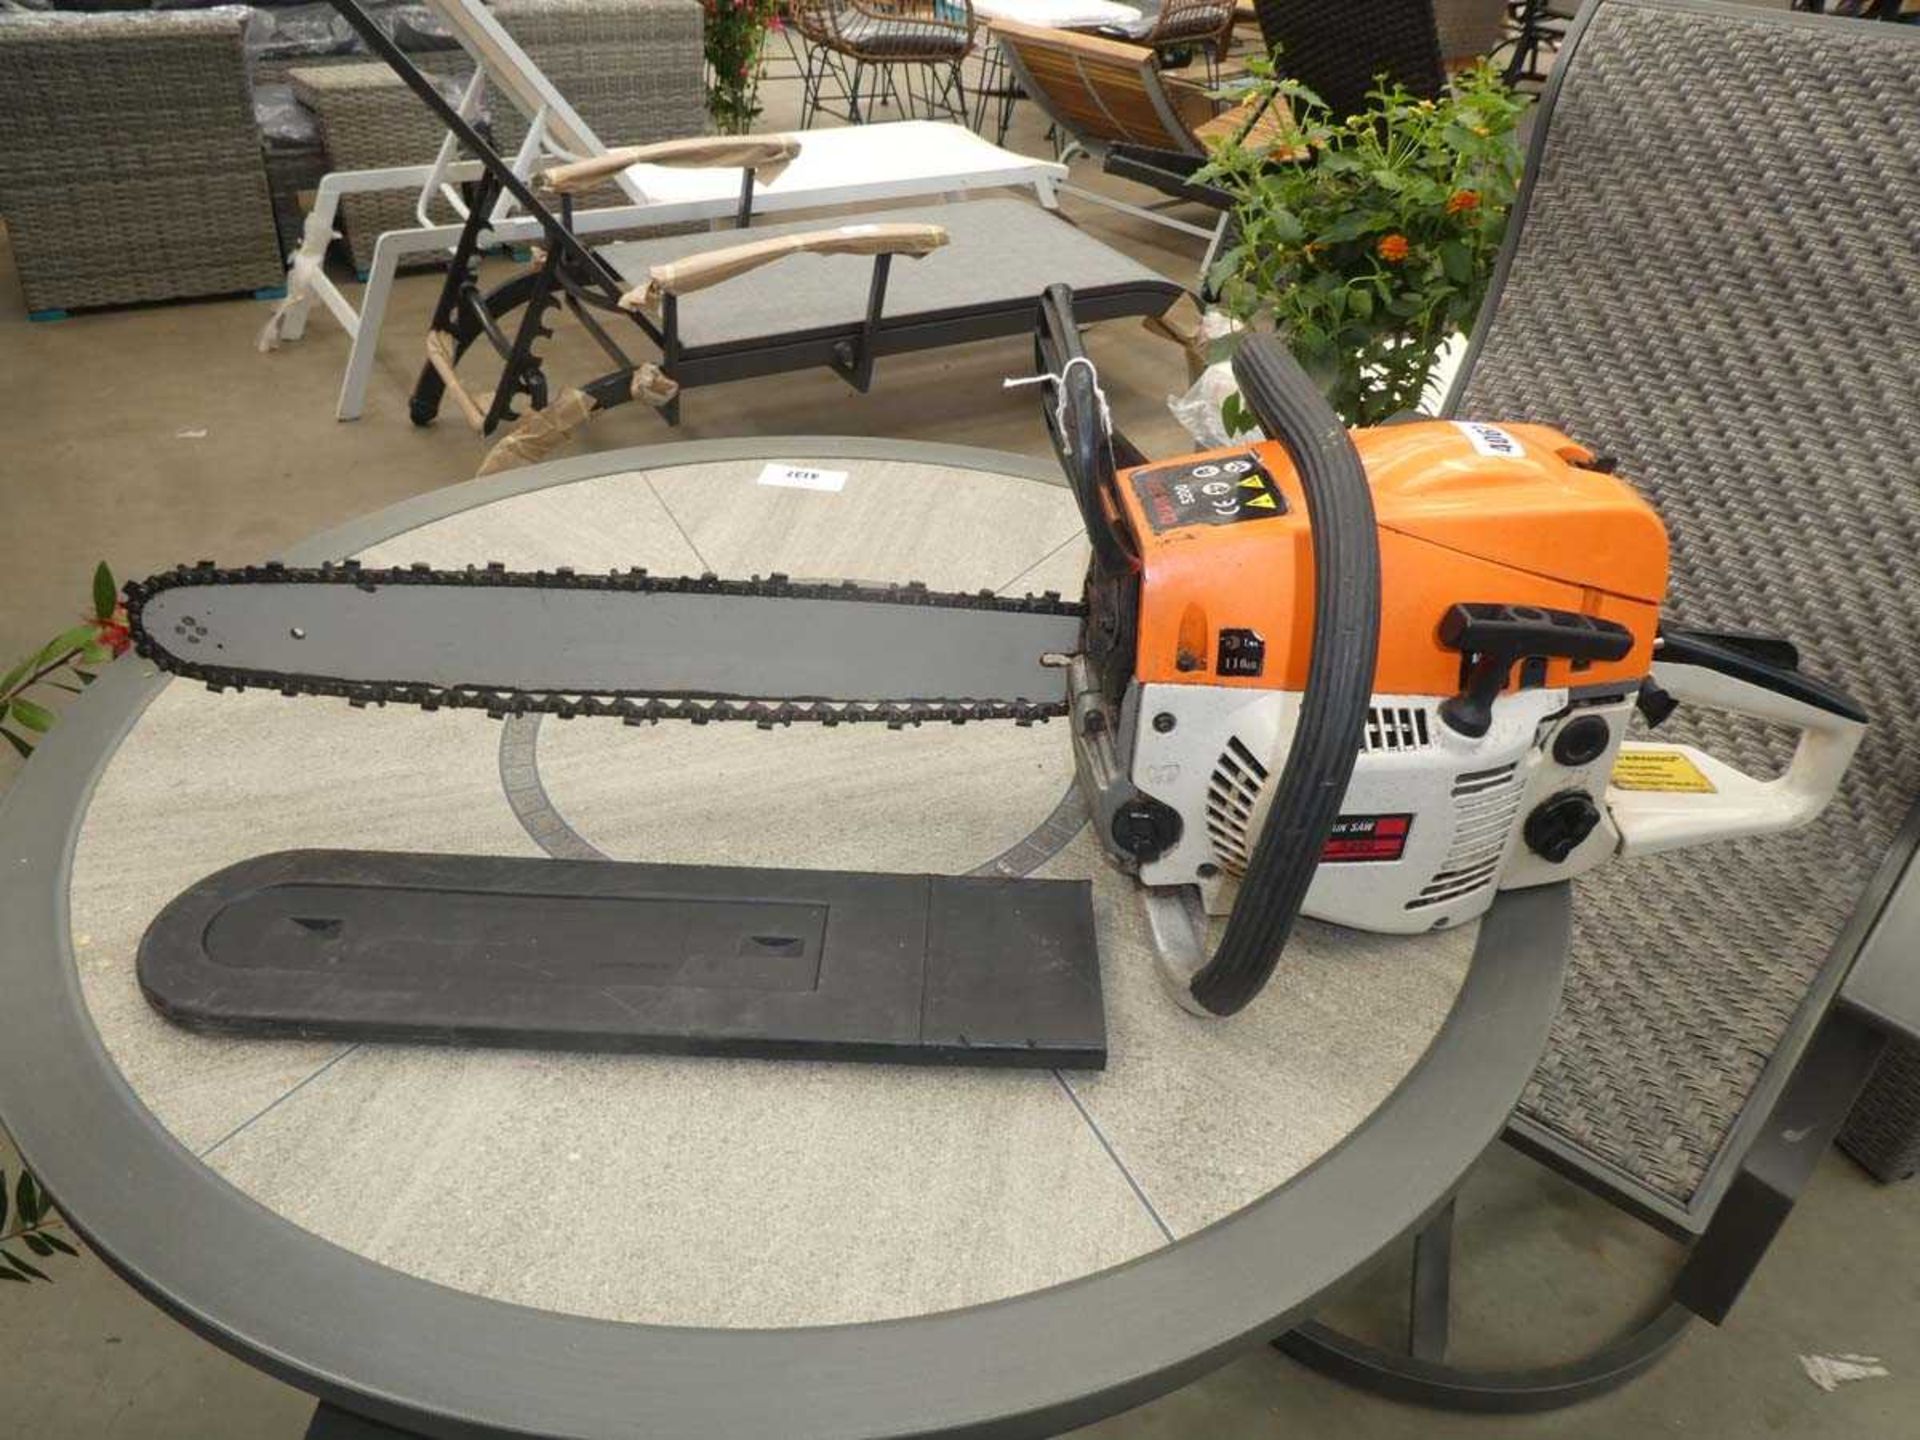 Green and white petrol powered chainsaw